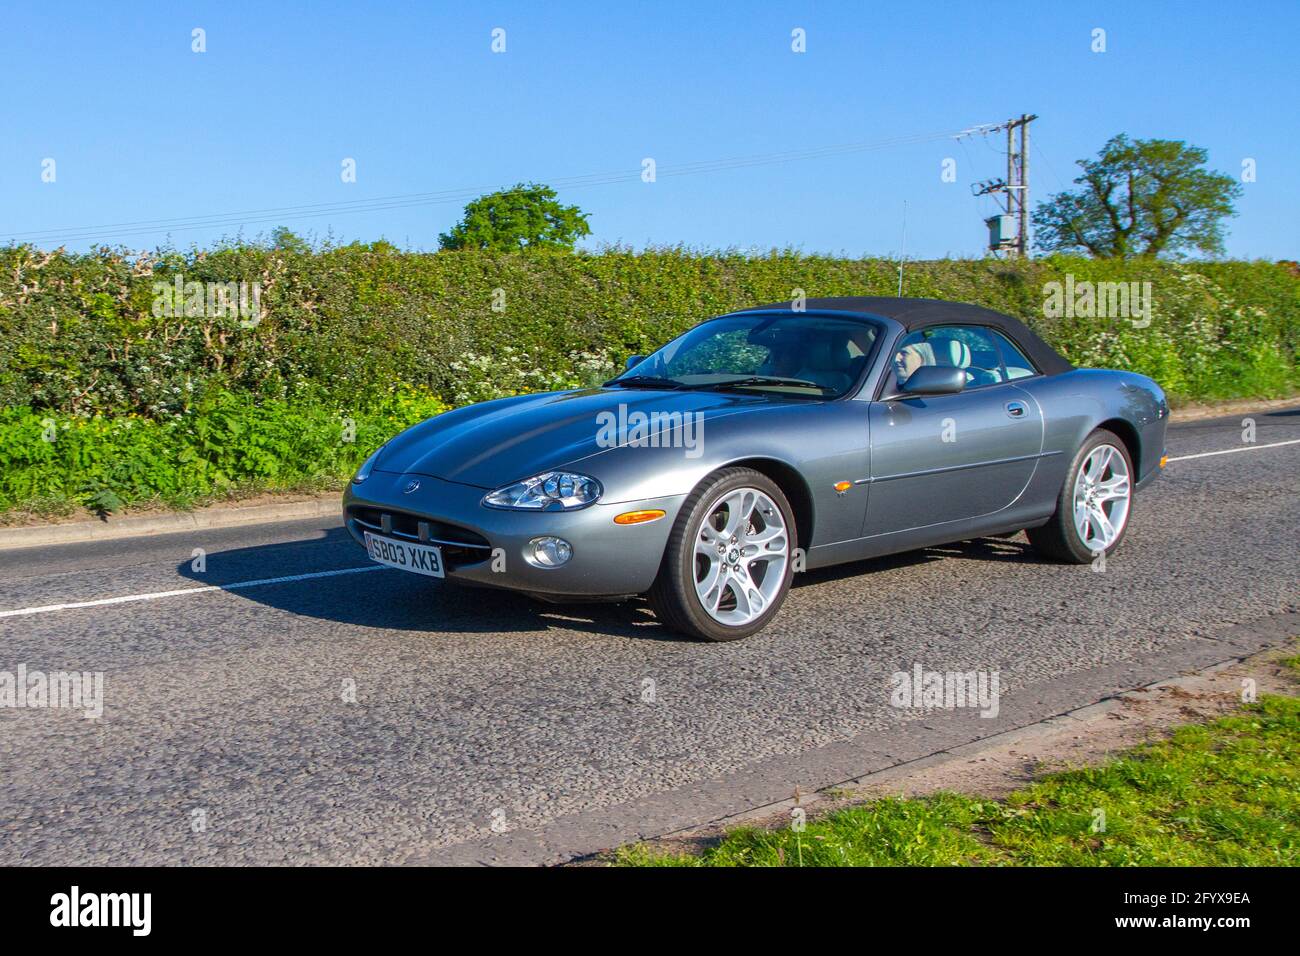 2003 grey Jaguar Xk8 Convertible 4196cc convertible Auto; Vehicular traffic, moving vehicles, cars, vehicle driving on UK roads, motors, motoring  en-route to Capesthorne Hall classic May car show, Cheshire, UK Stock Photo